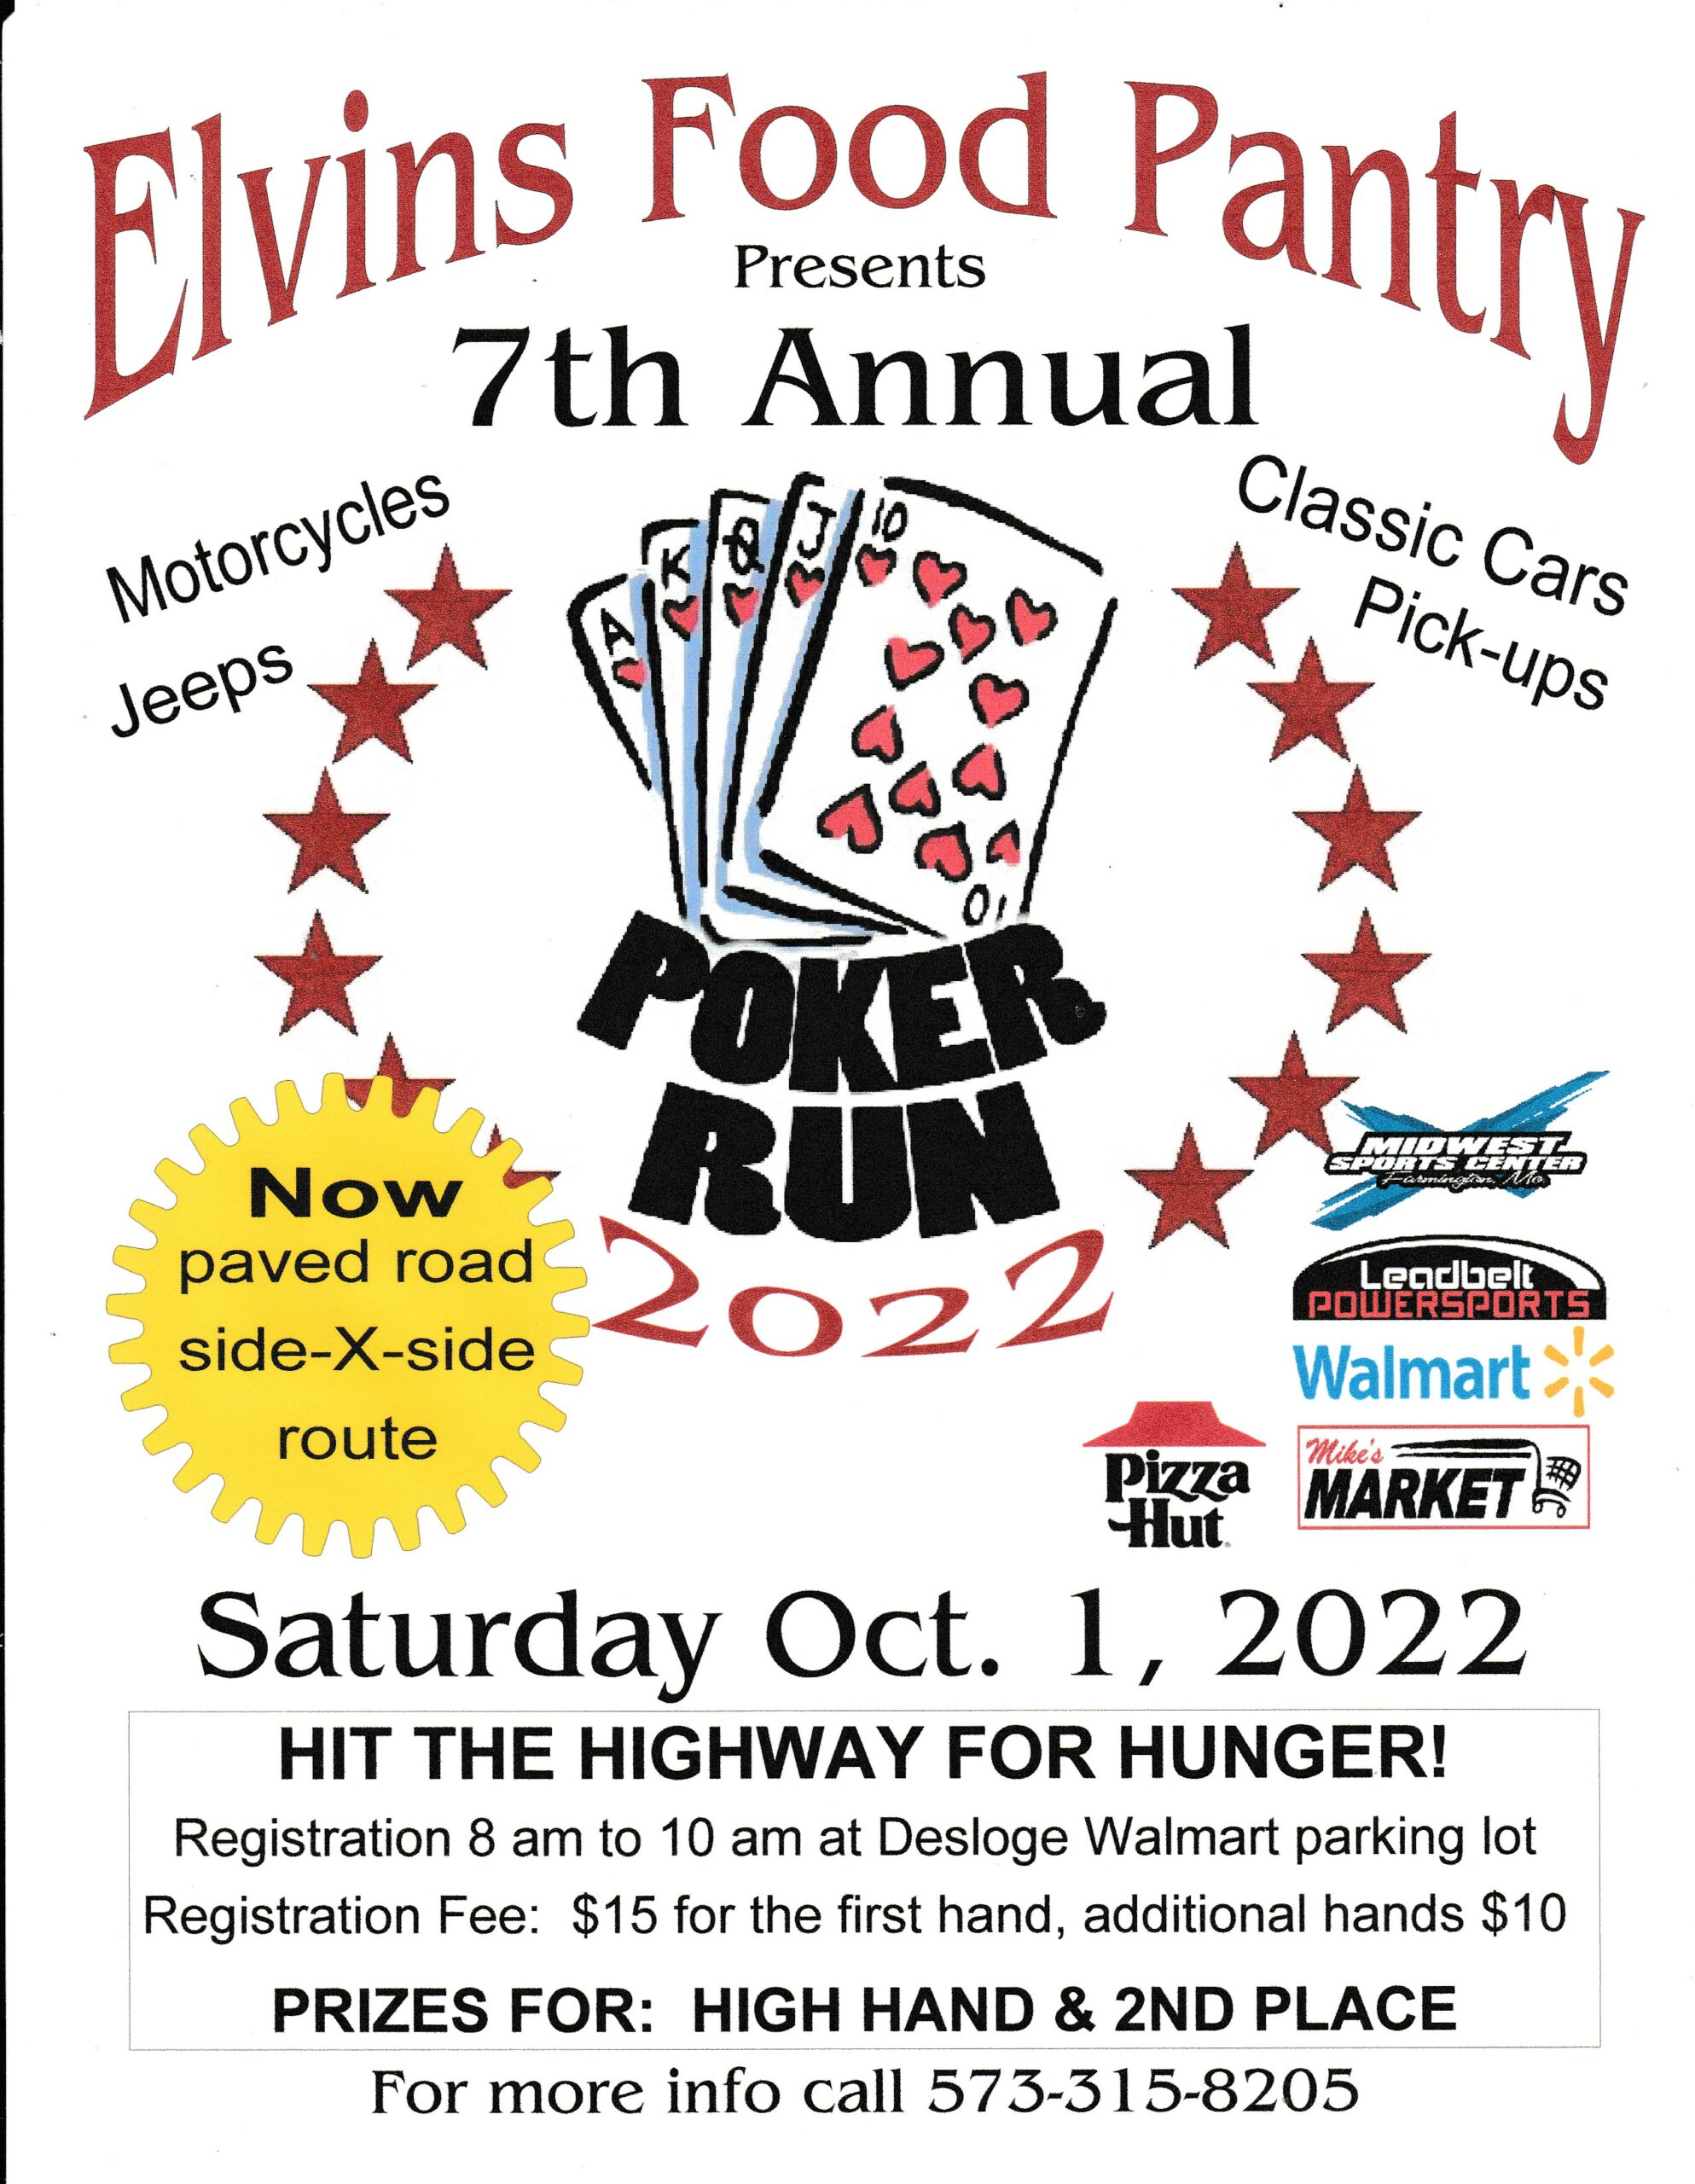 <h1 class="tribe-events-single-event-title">Hit the Highway for Hunger POKER RUN for Elvins Food Pantry</h1>